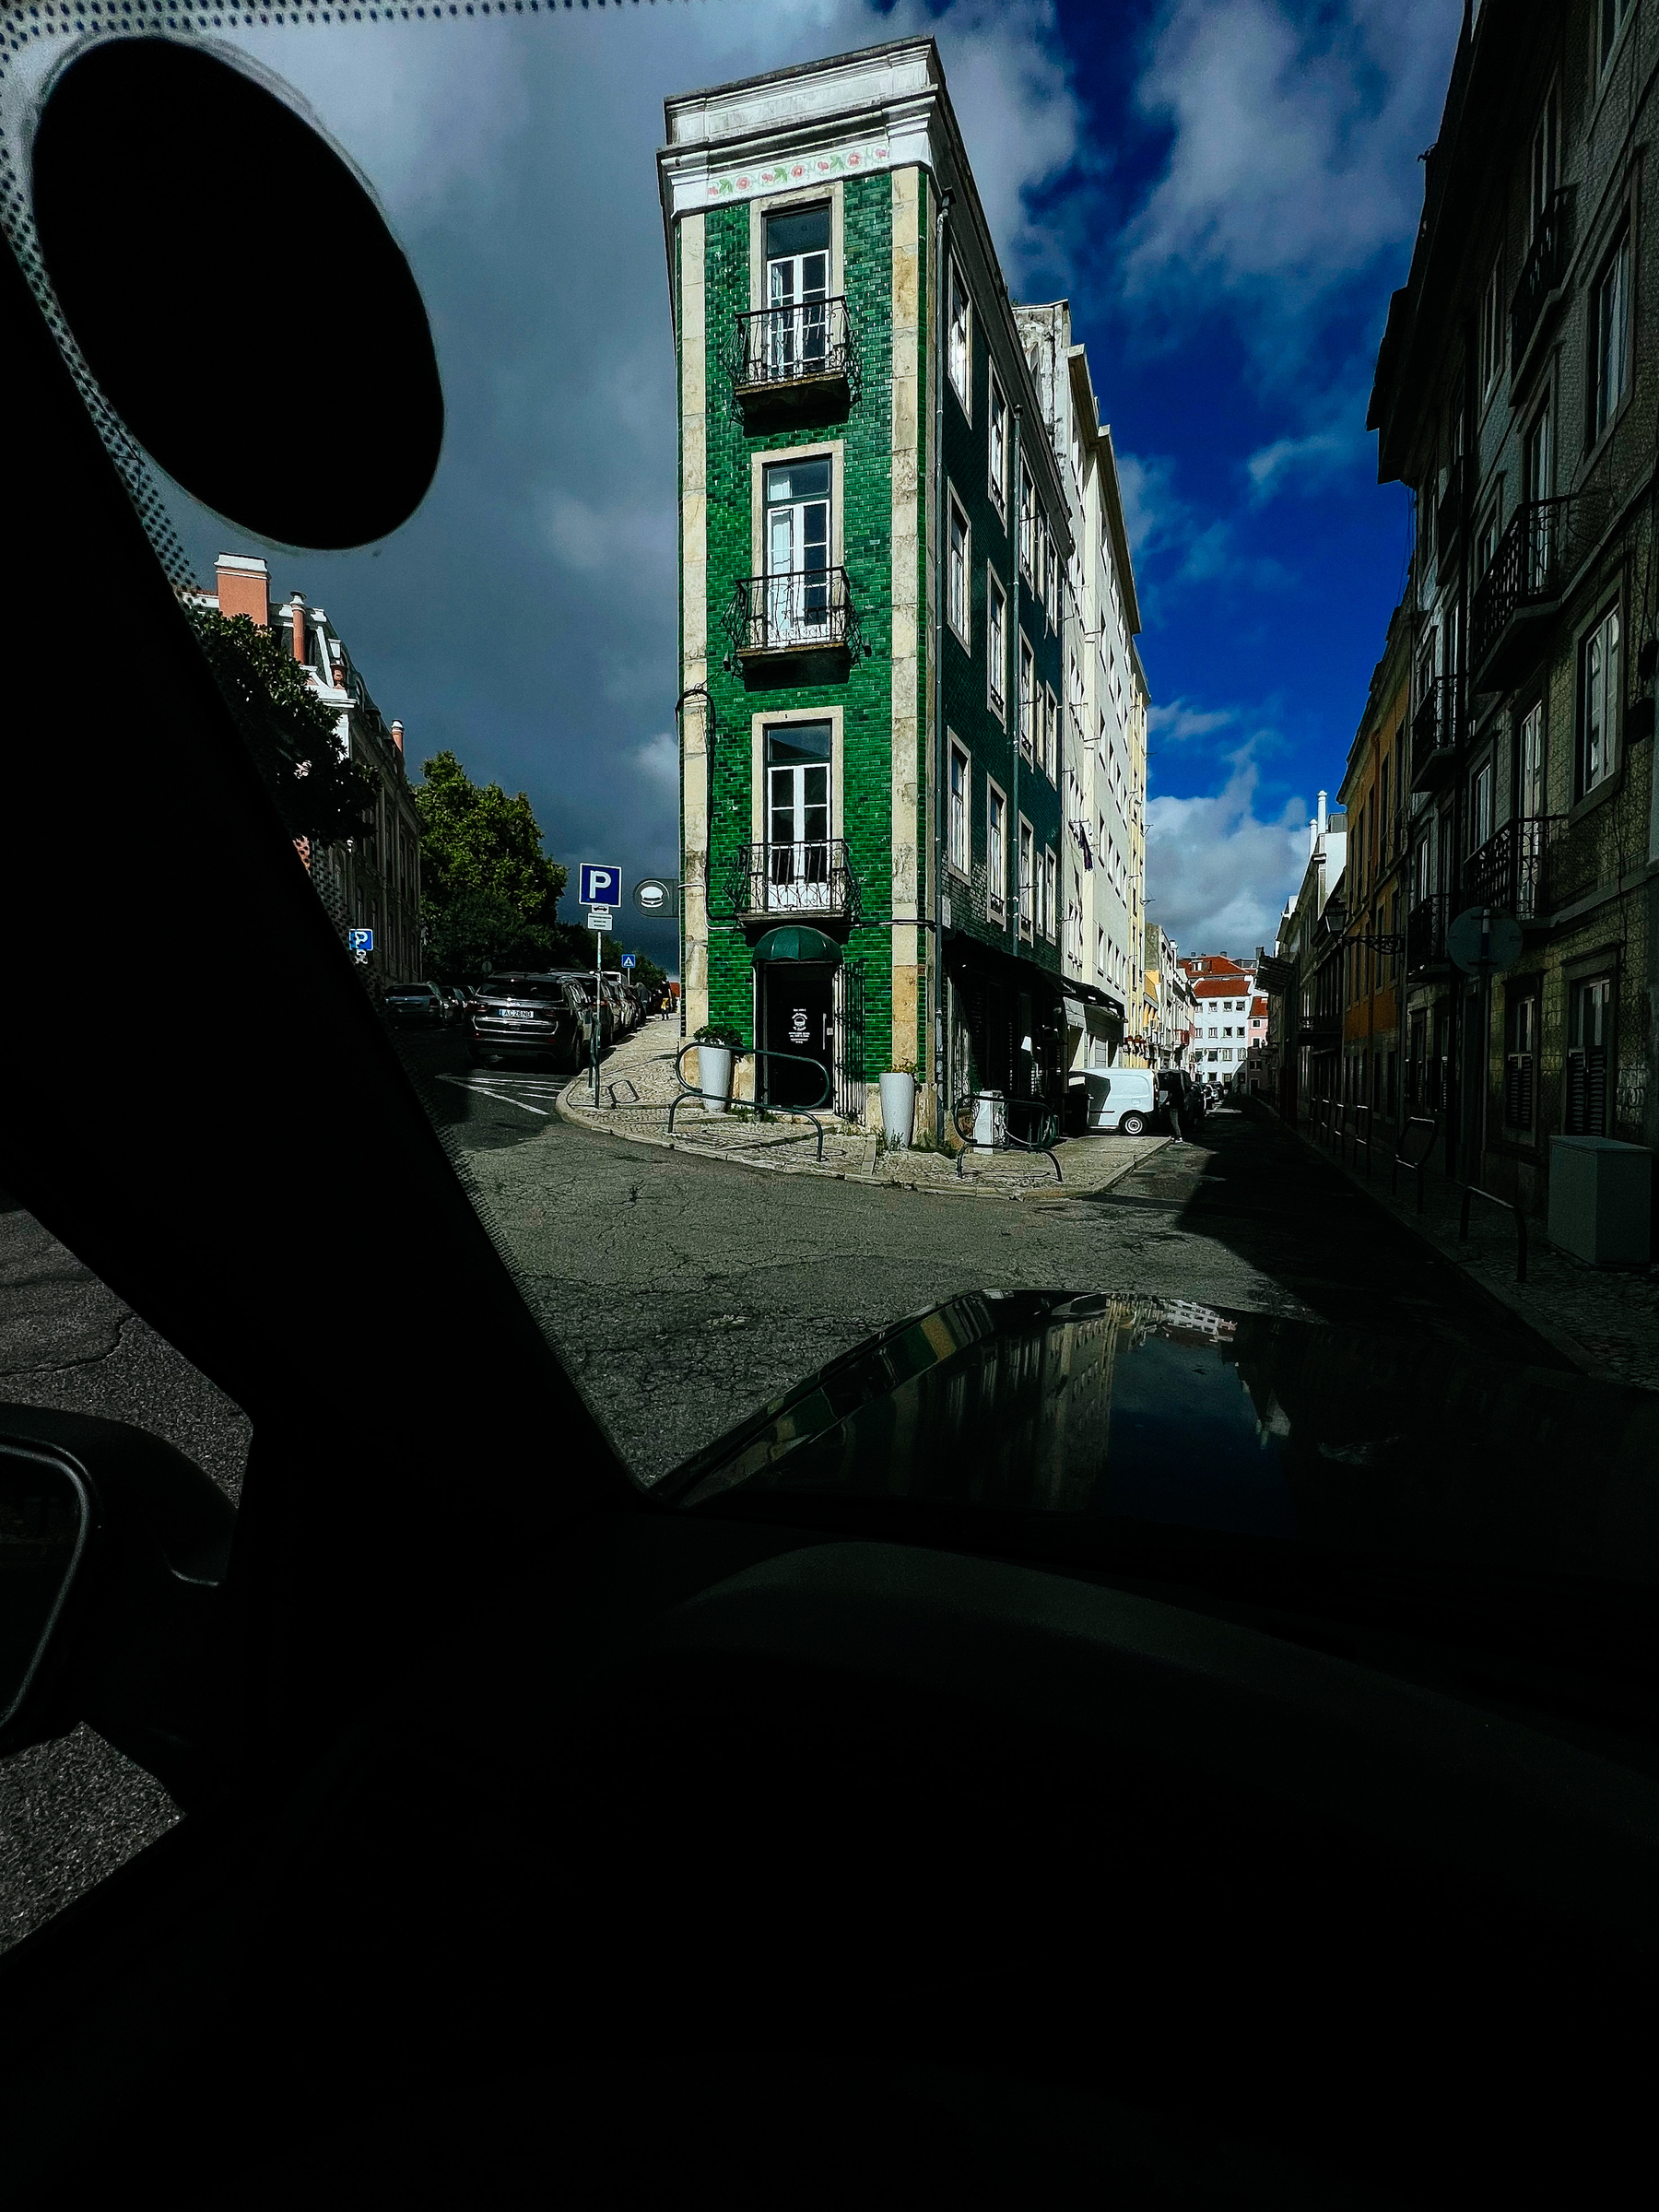 view from inside a car, a green skinny building in the middle of the city